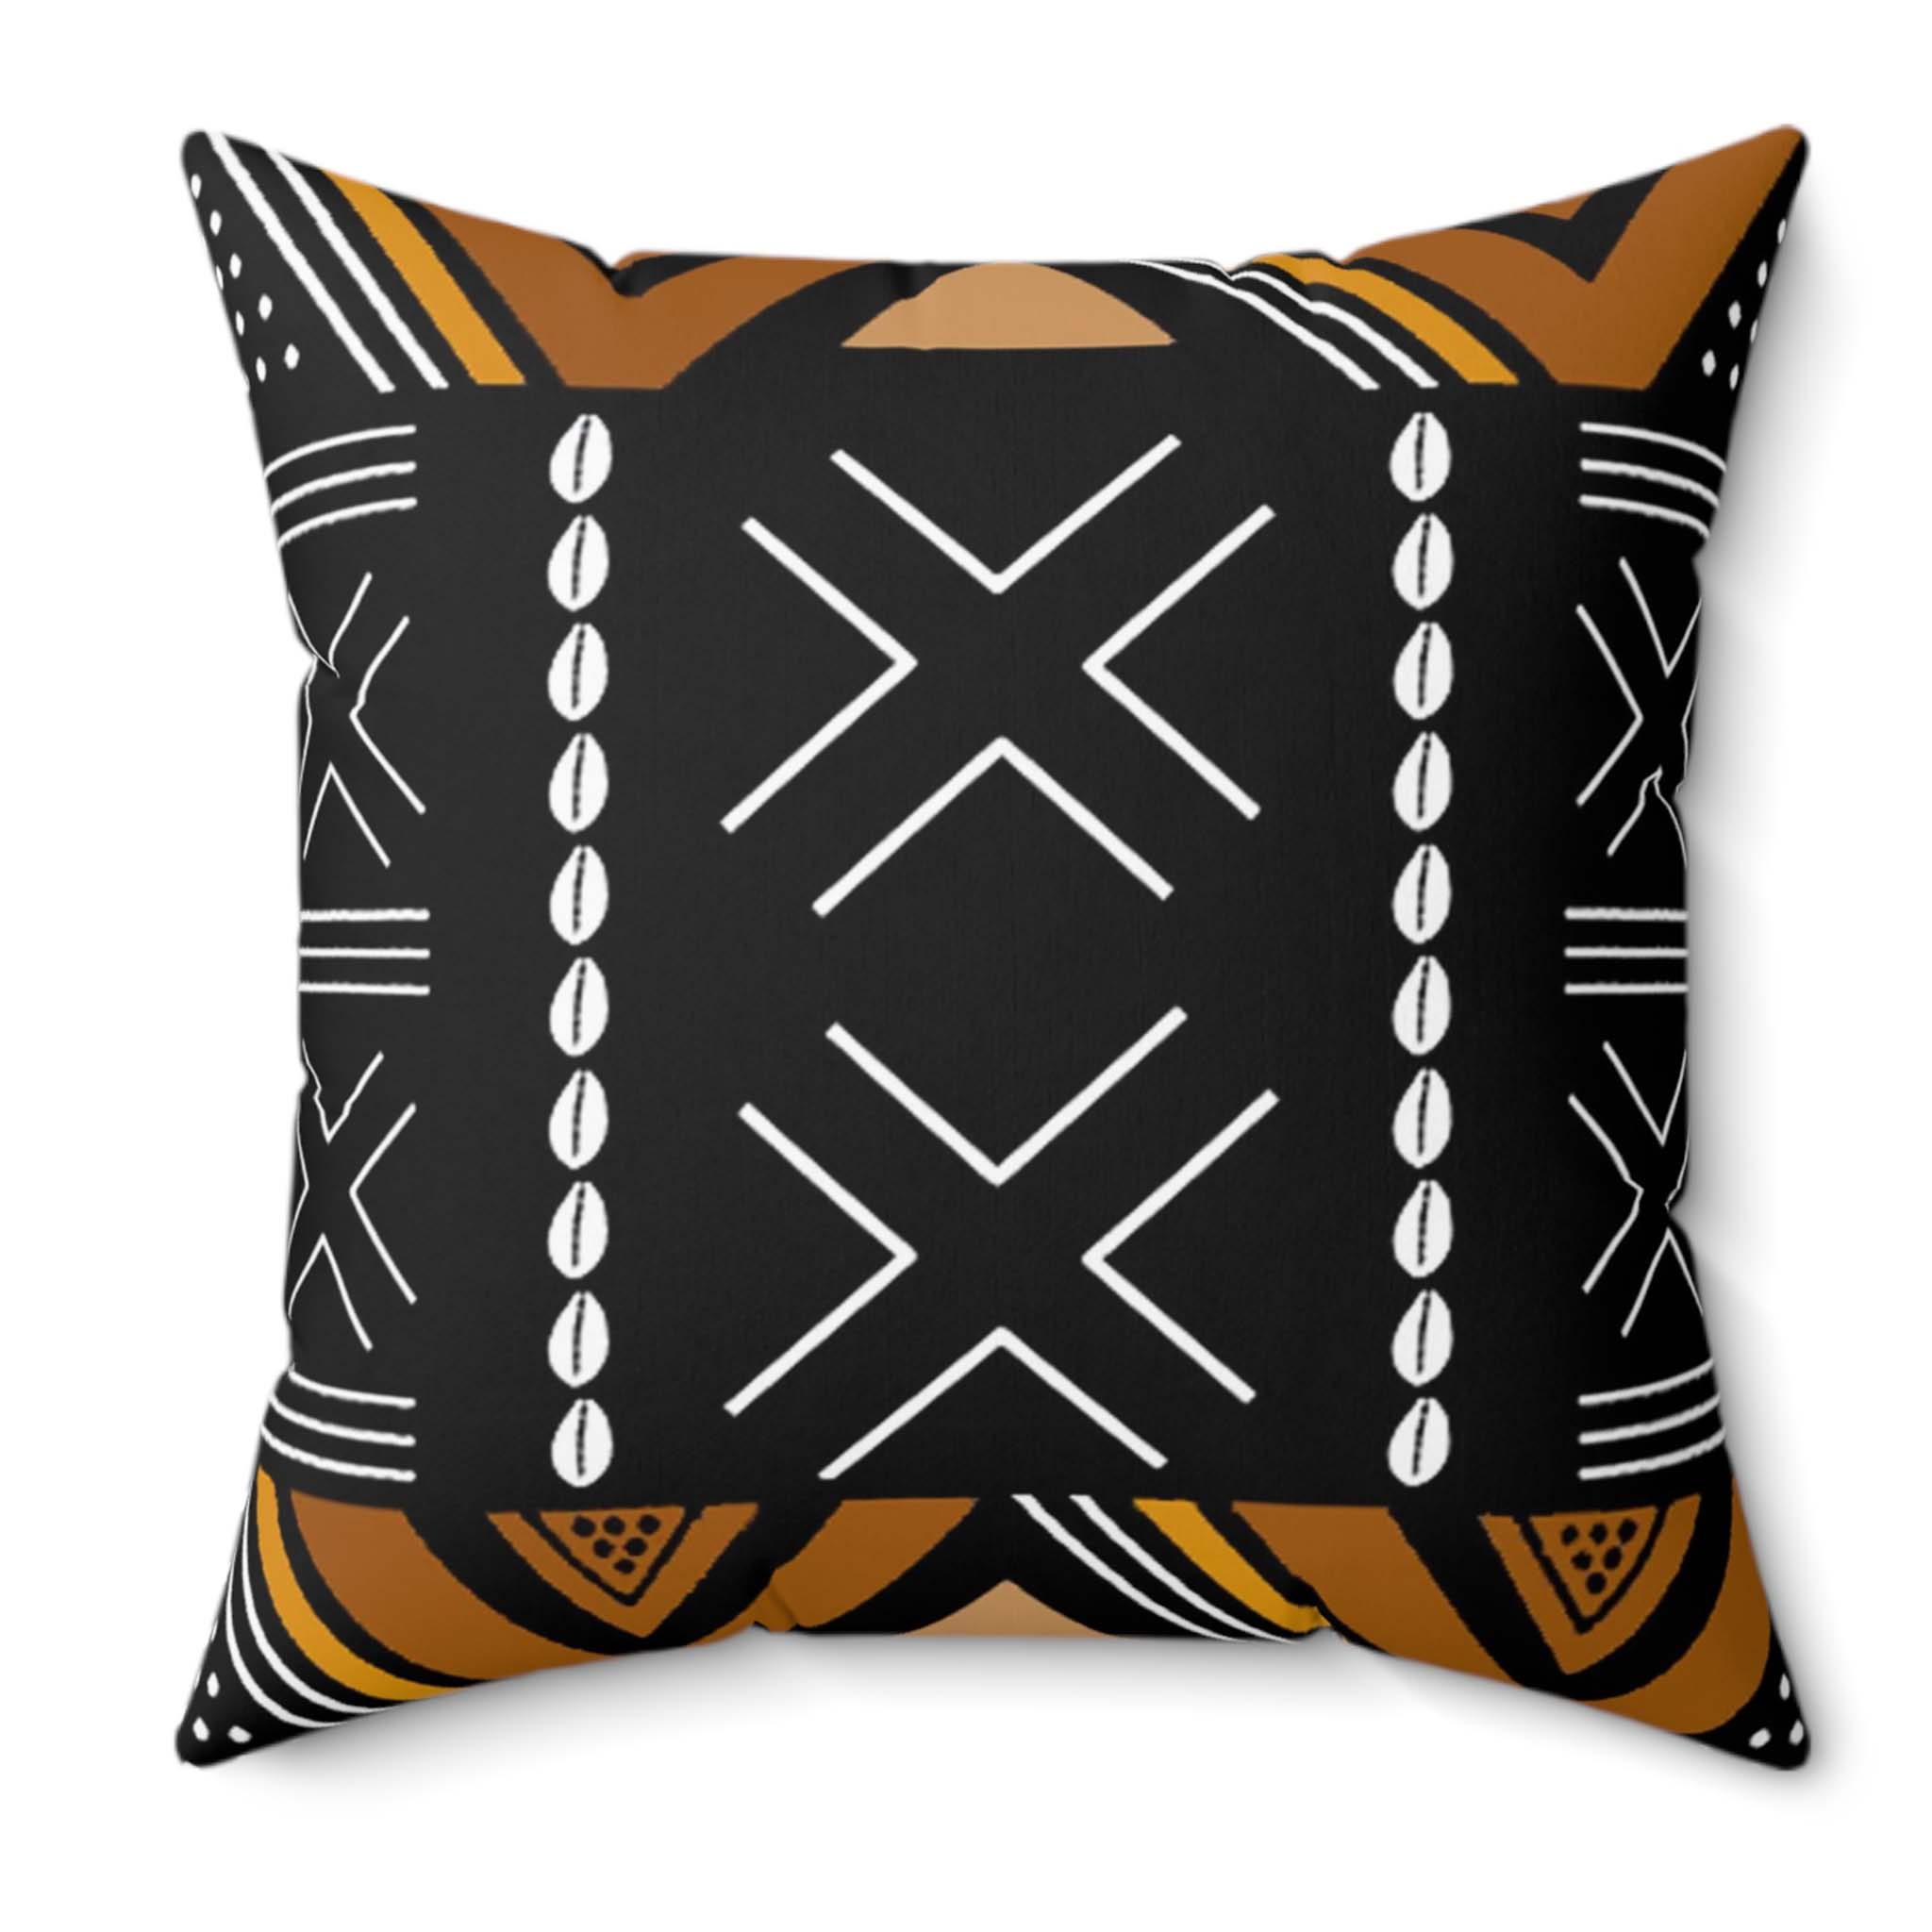 2 Sets of Tribal Cushion Pillow Case Throw Cover